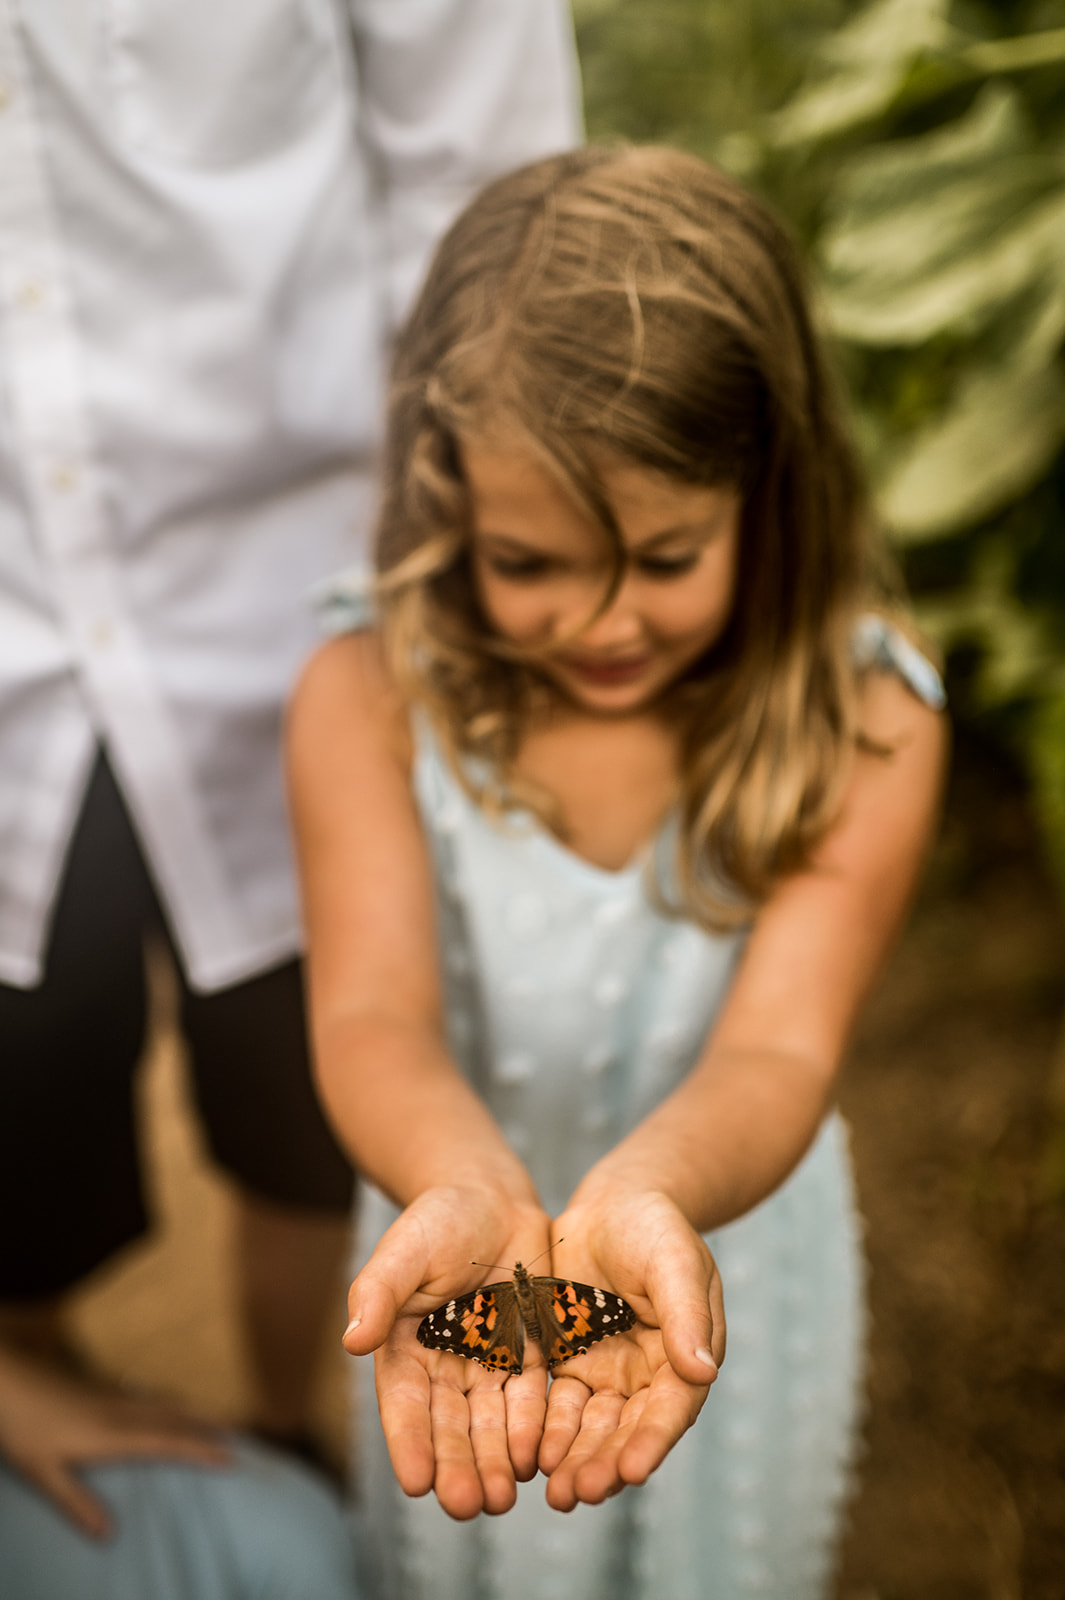 family found a butterfly among sunflowers for their golden hour session at Lee Farms